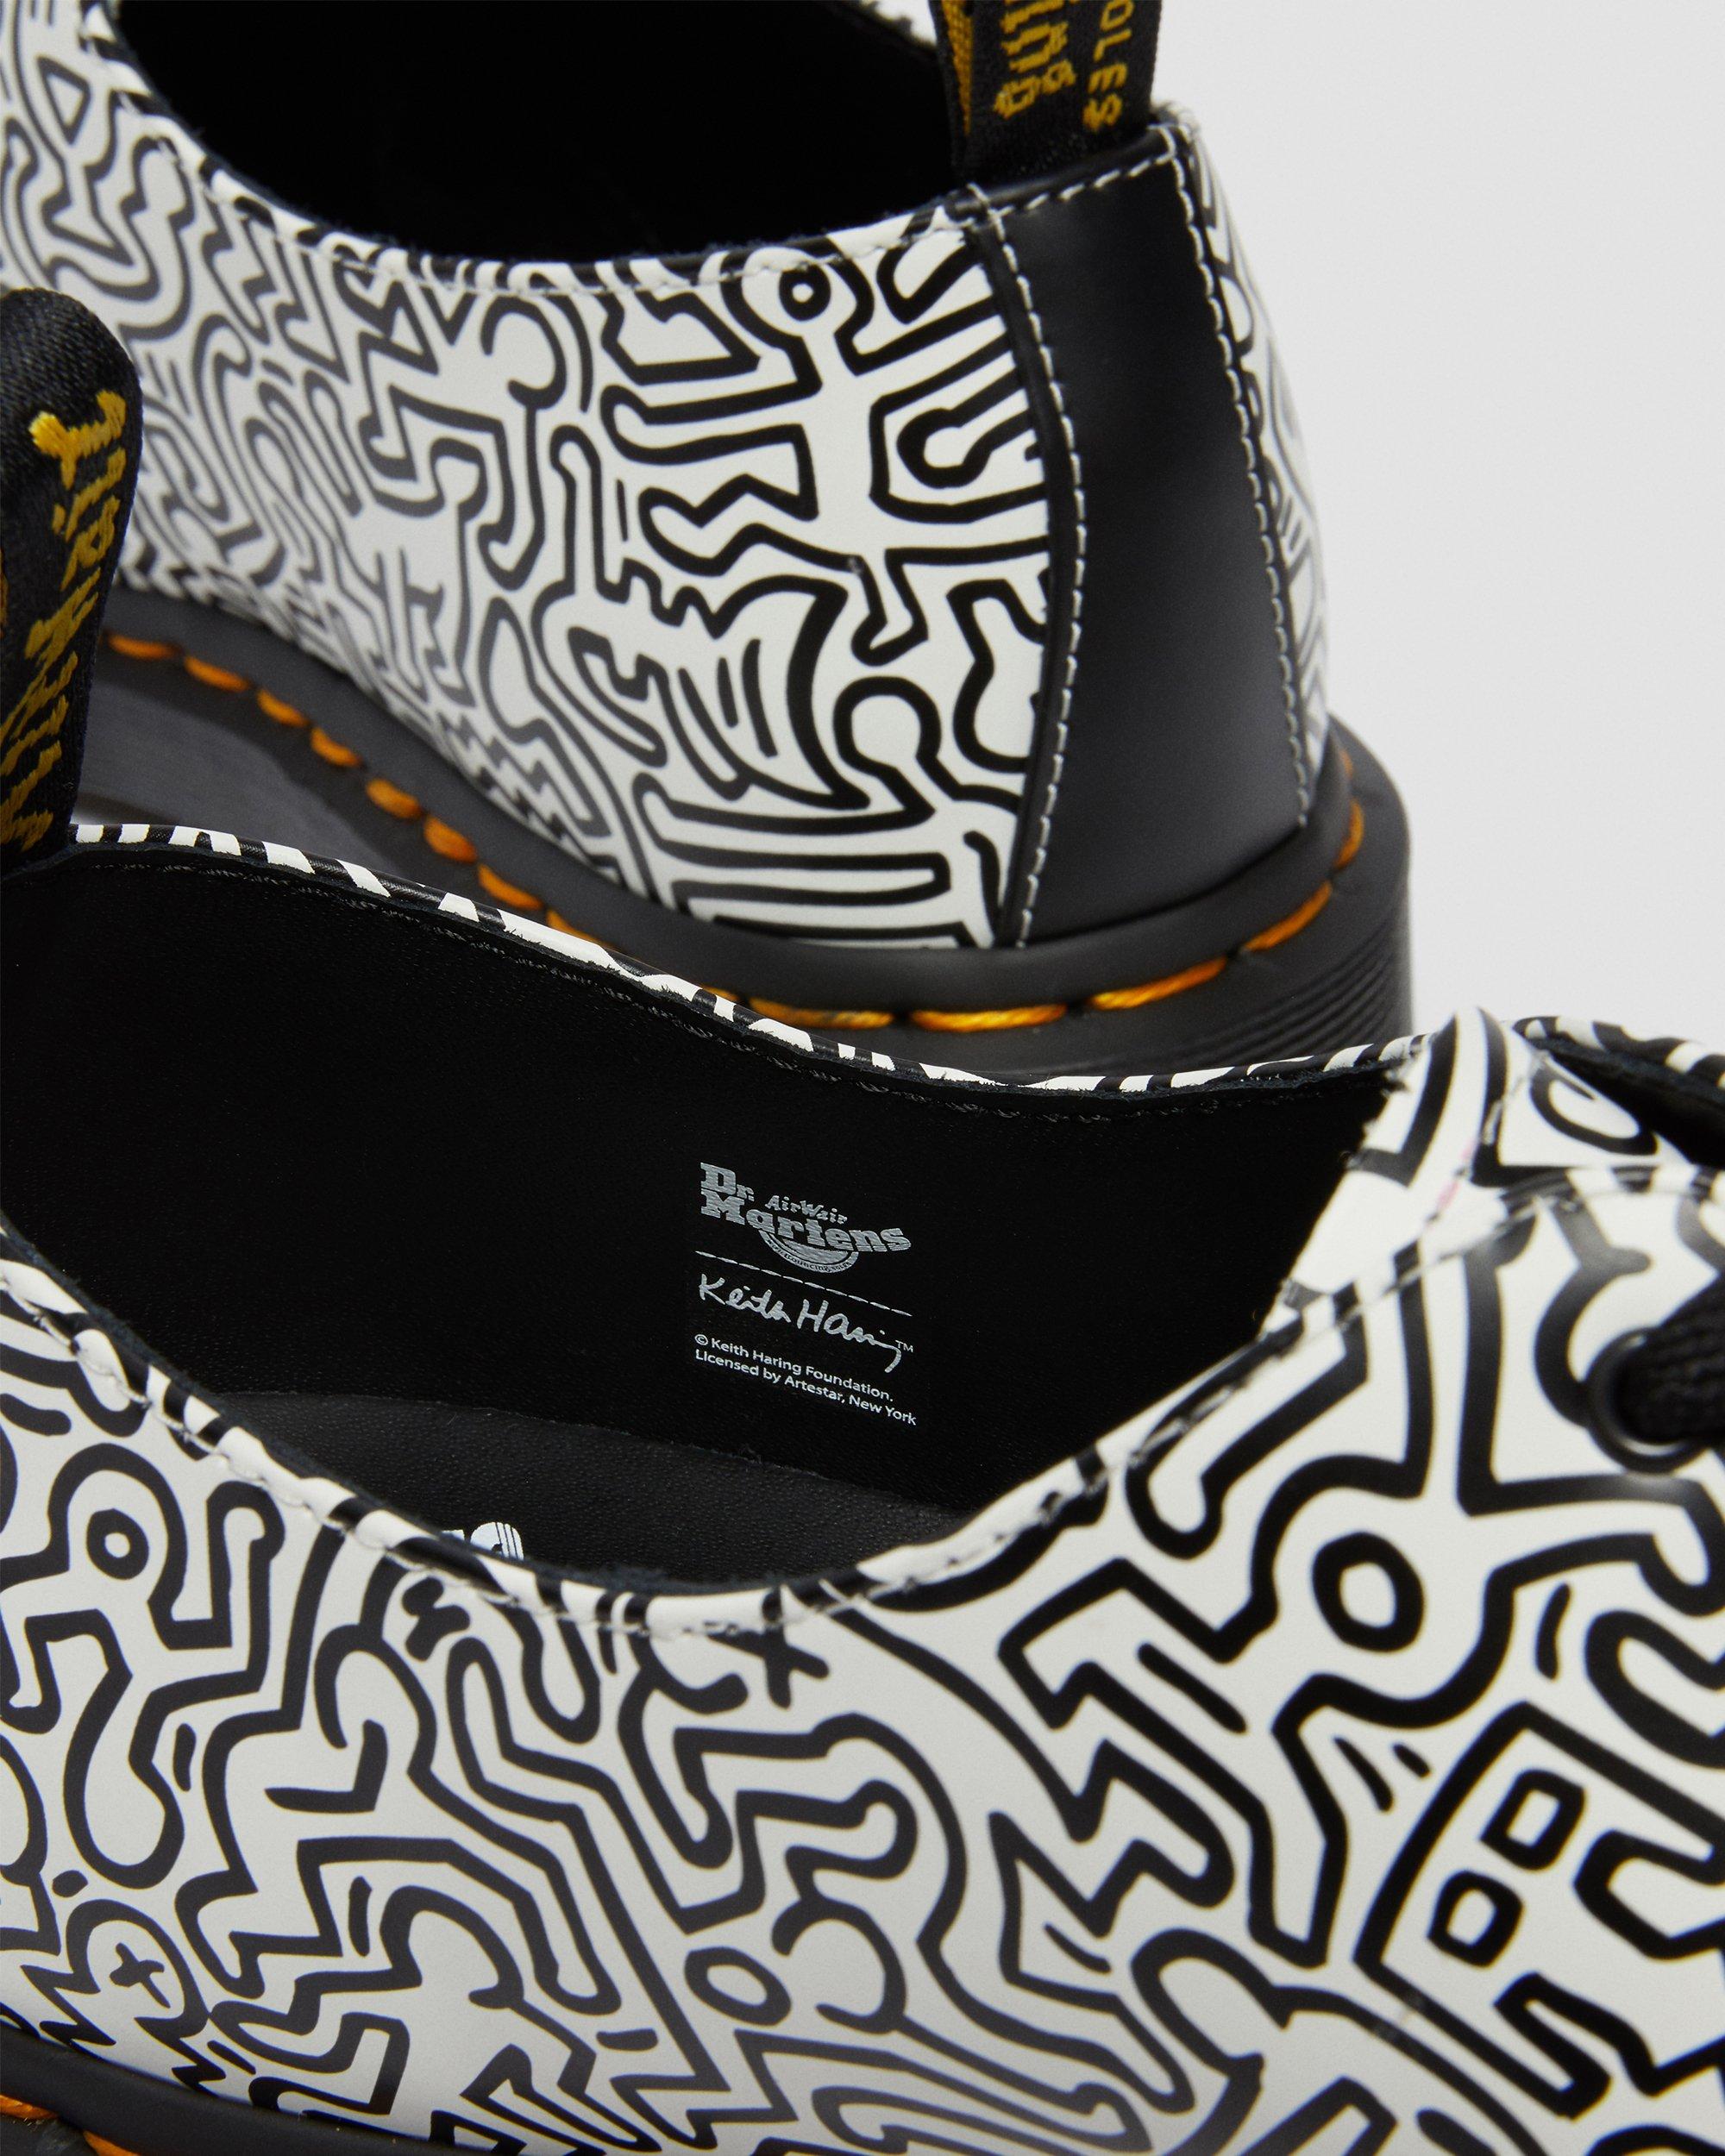 Keith Haring 1461 Printed Leather Oxford Shoes, Black | Dr. Martens